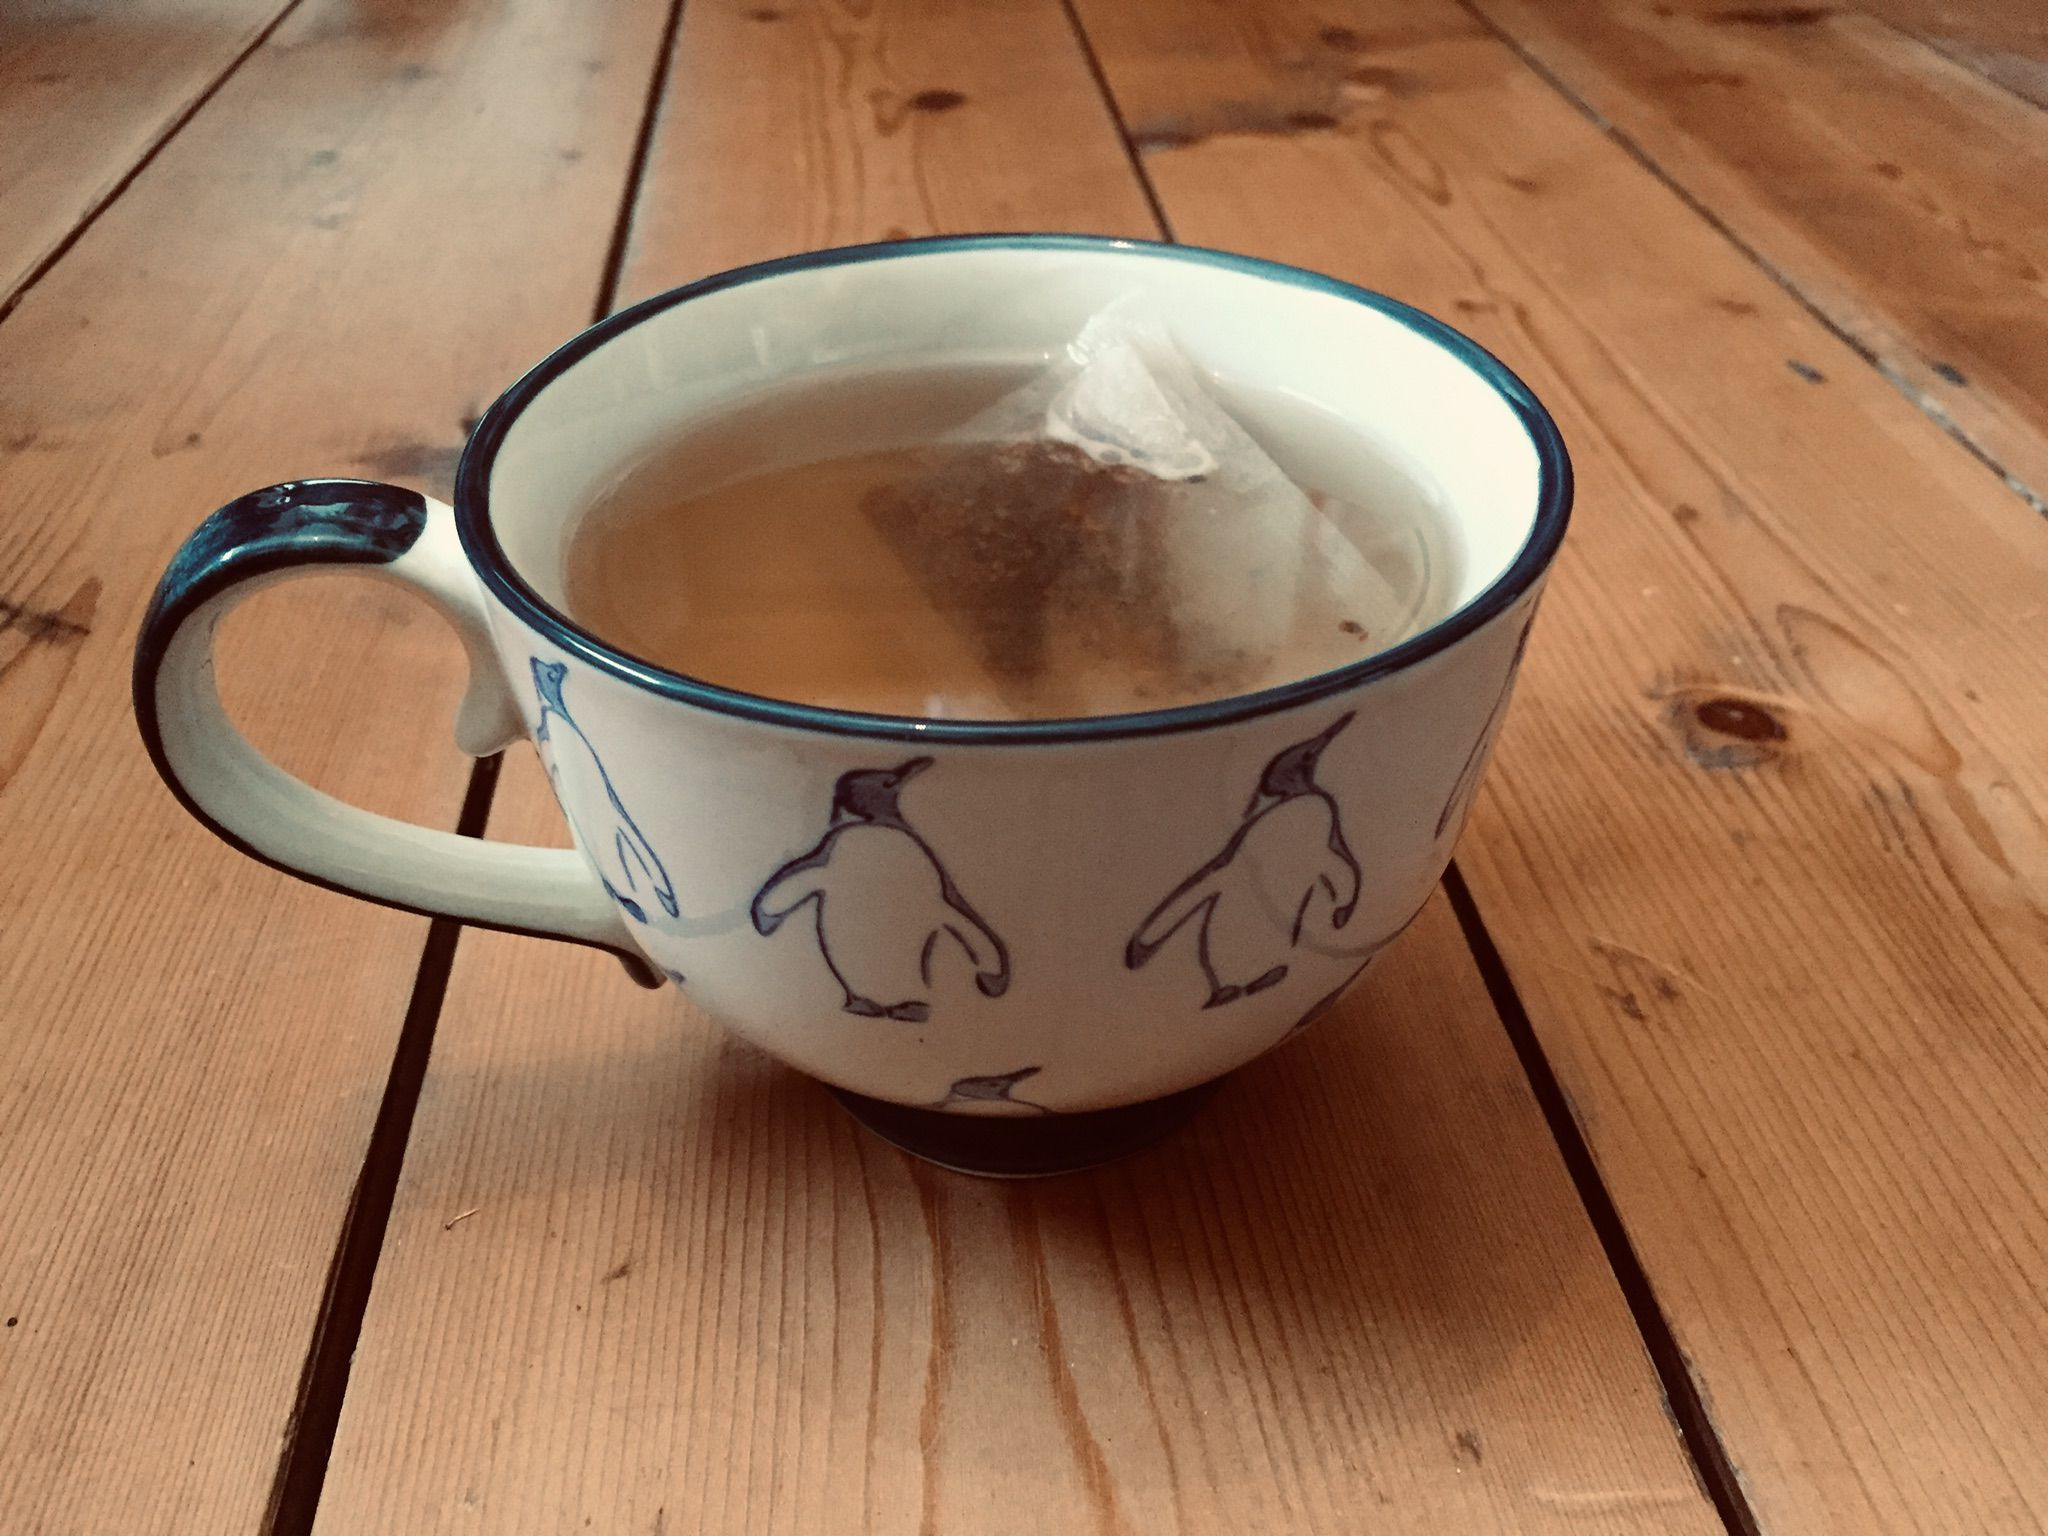 A cup decorated with penguins, containing a teabag in hot water, on wooden planks